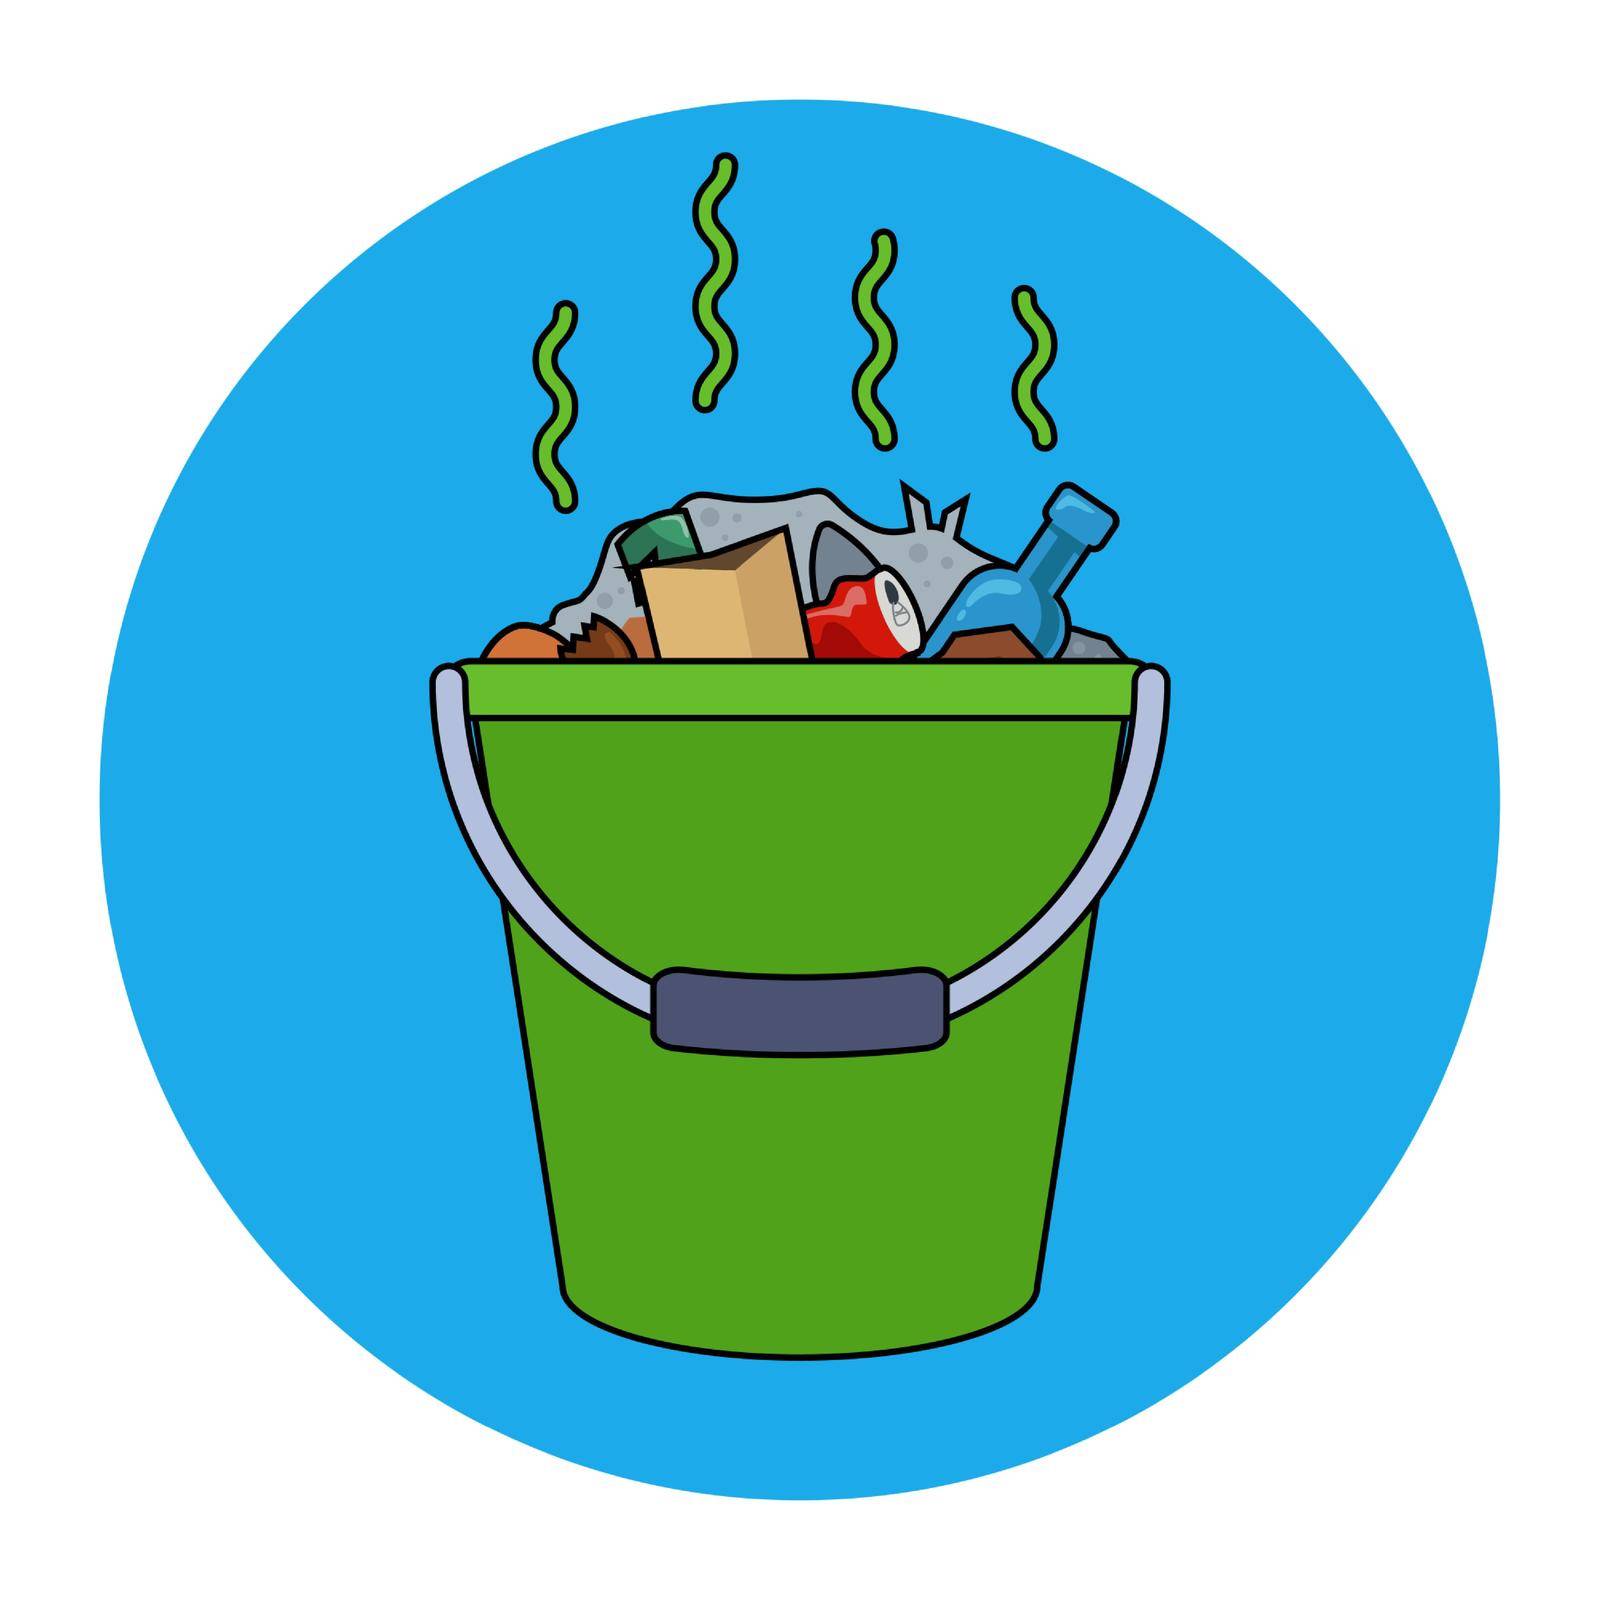 green bucket filled with rubbish. household household waste. flat vector illustration.